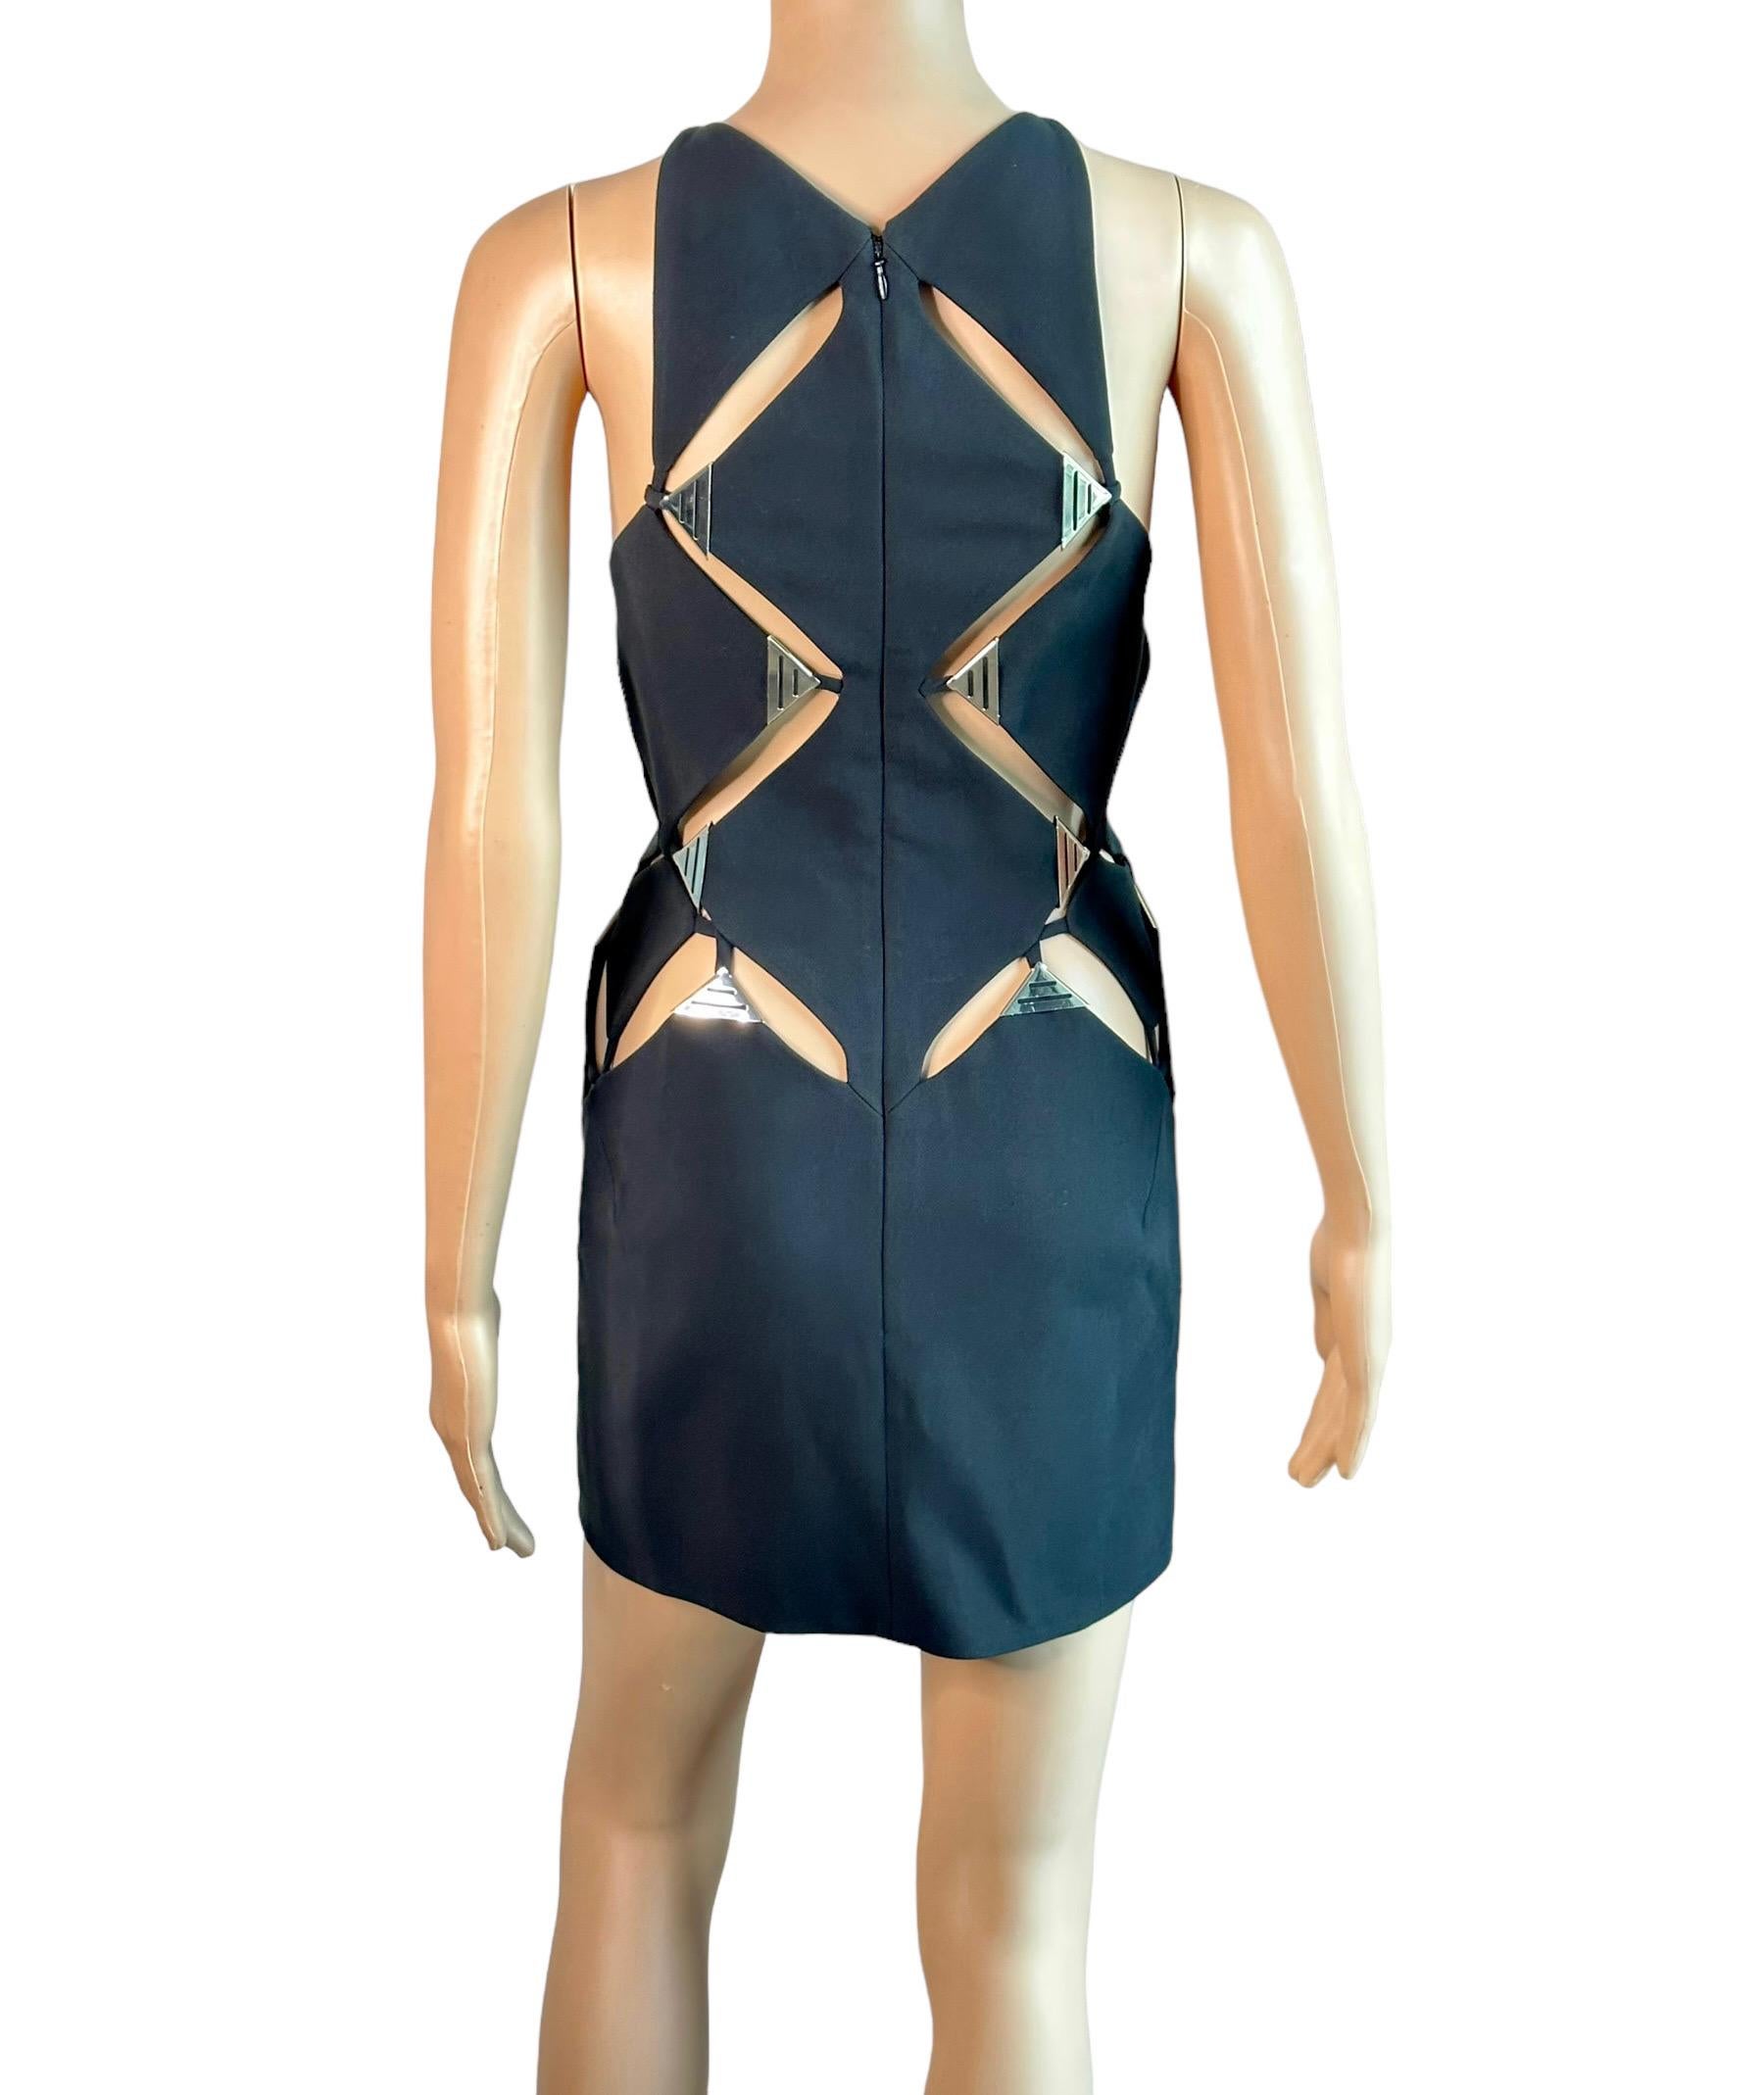 Mugler S/S 2016 Runway Embellished Cutout Panels Black Mini Dress  In Excellent Condition For Sale In Naples, FL